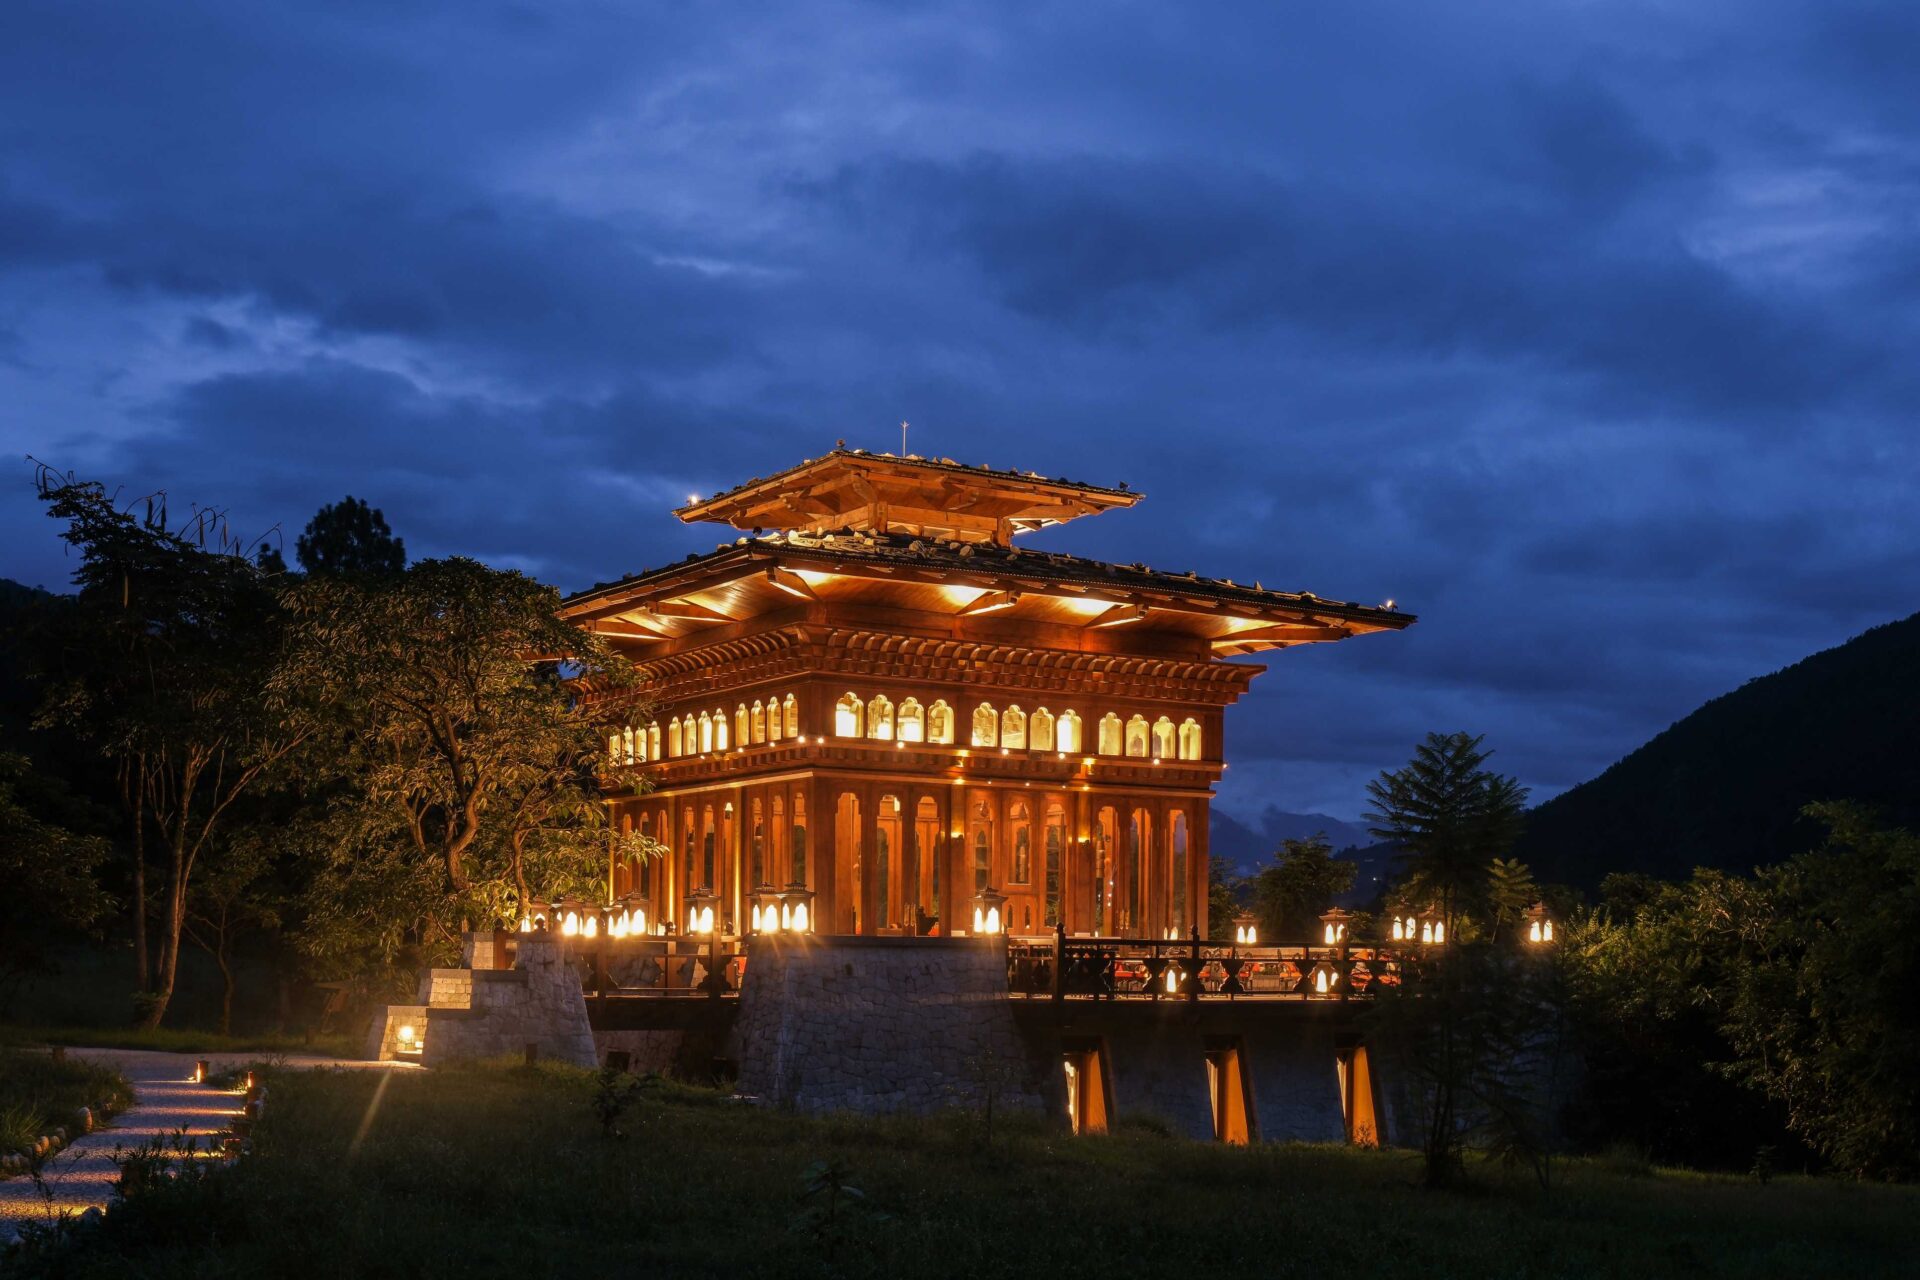 Bhutan witnesses its newest luxury property with the launch of Pemako Punakha